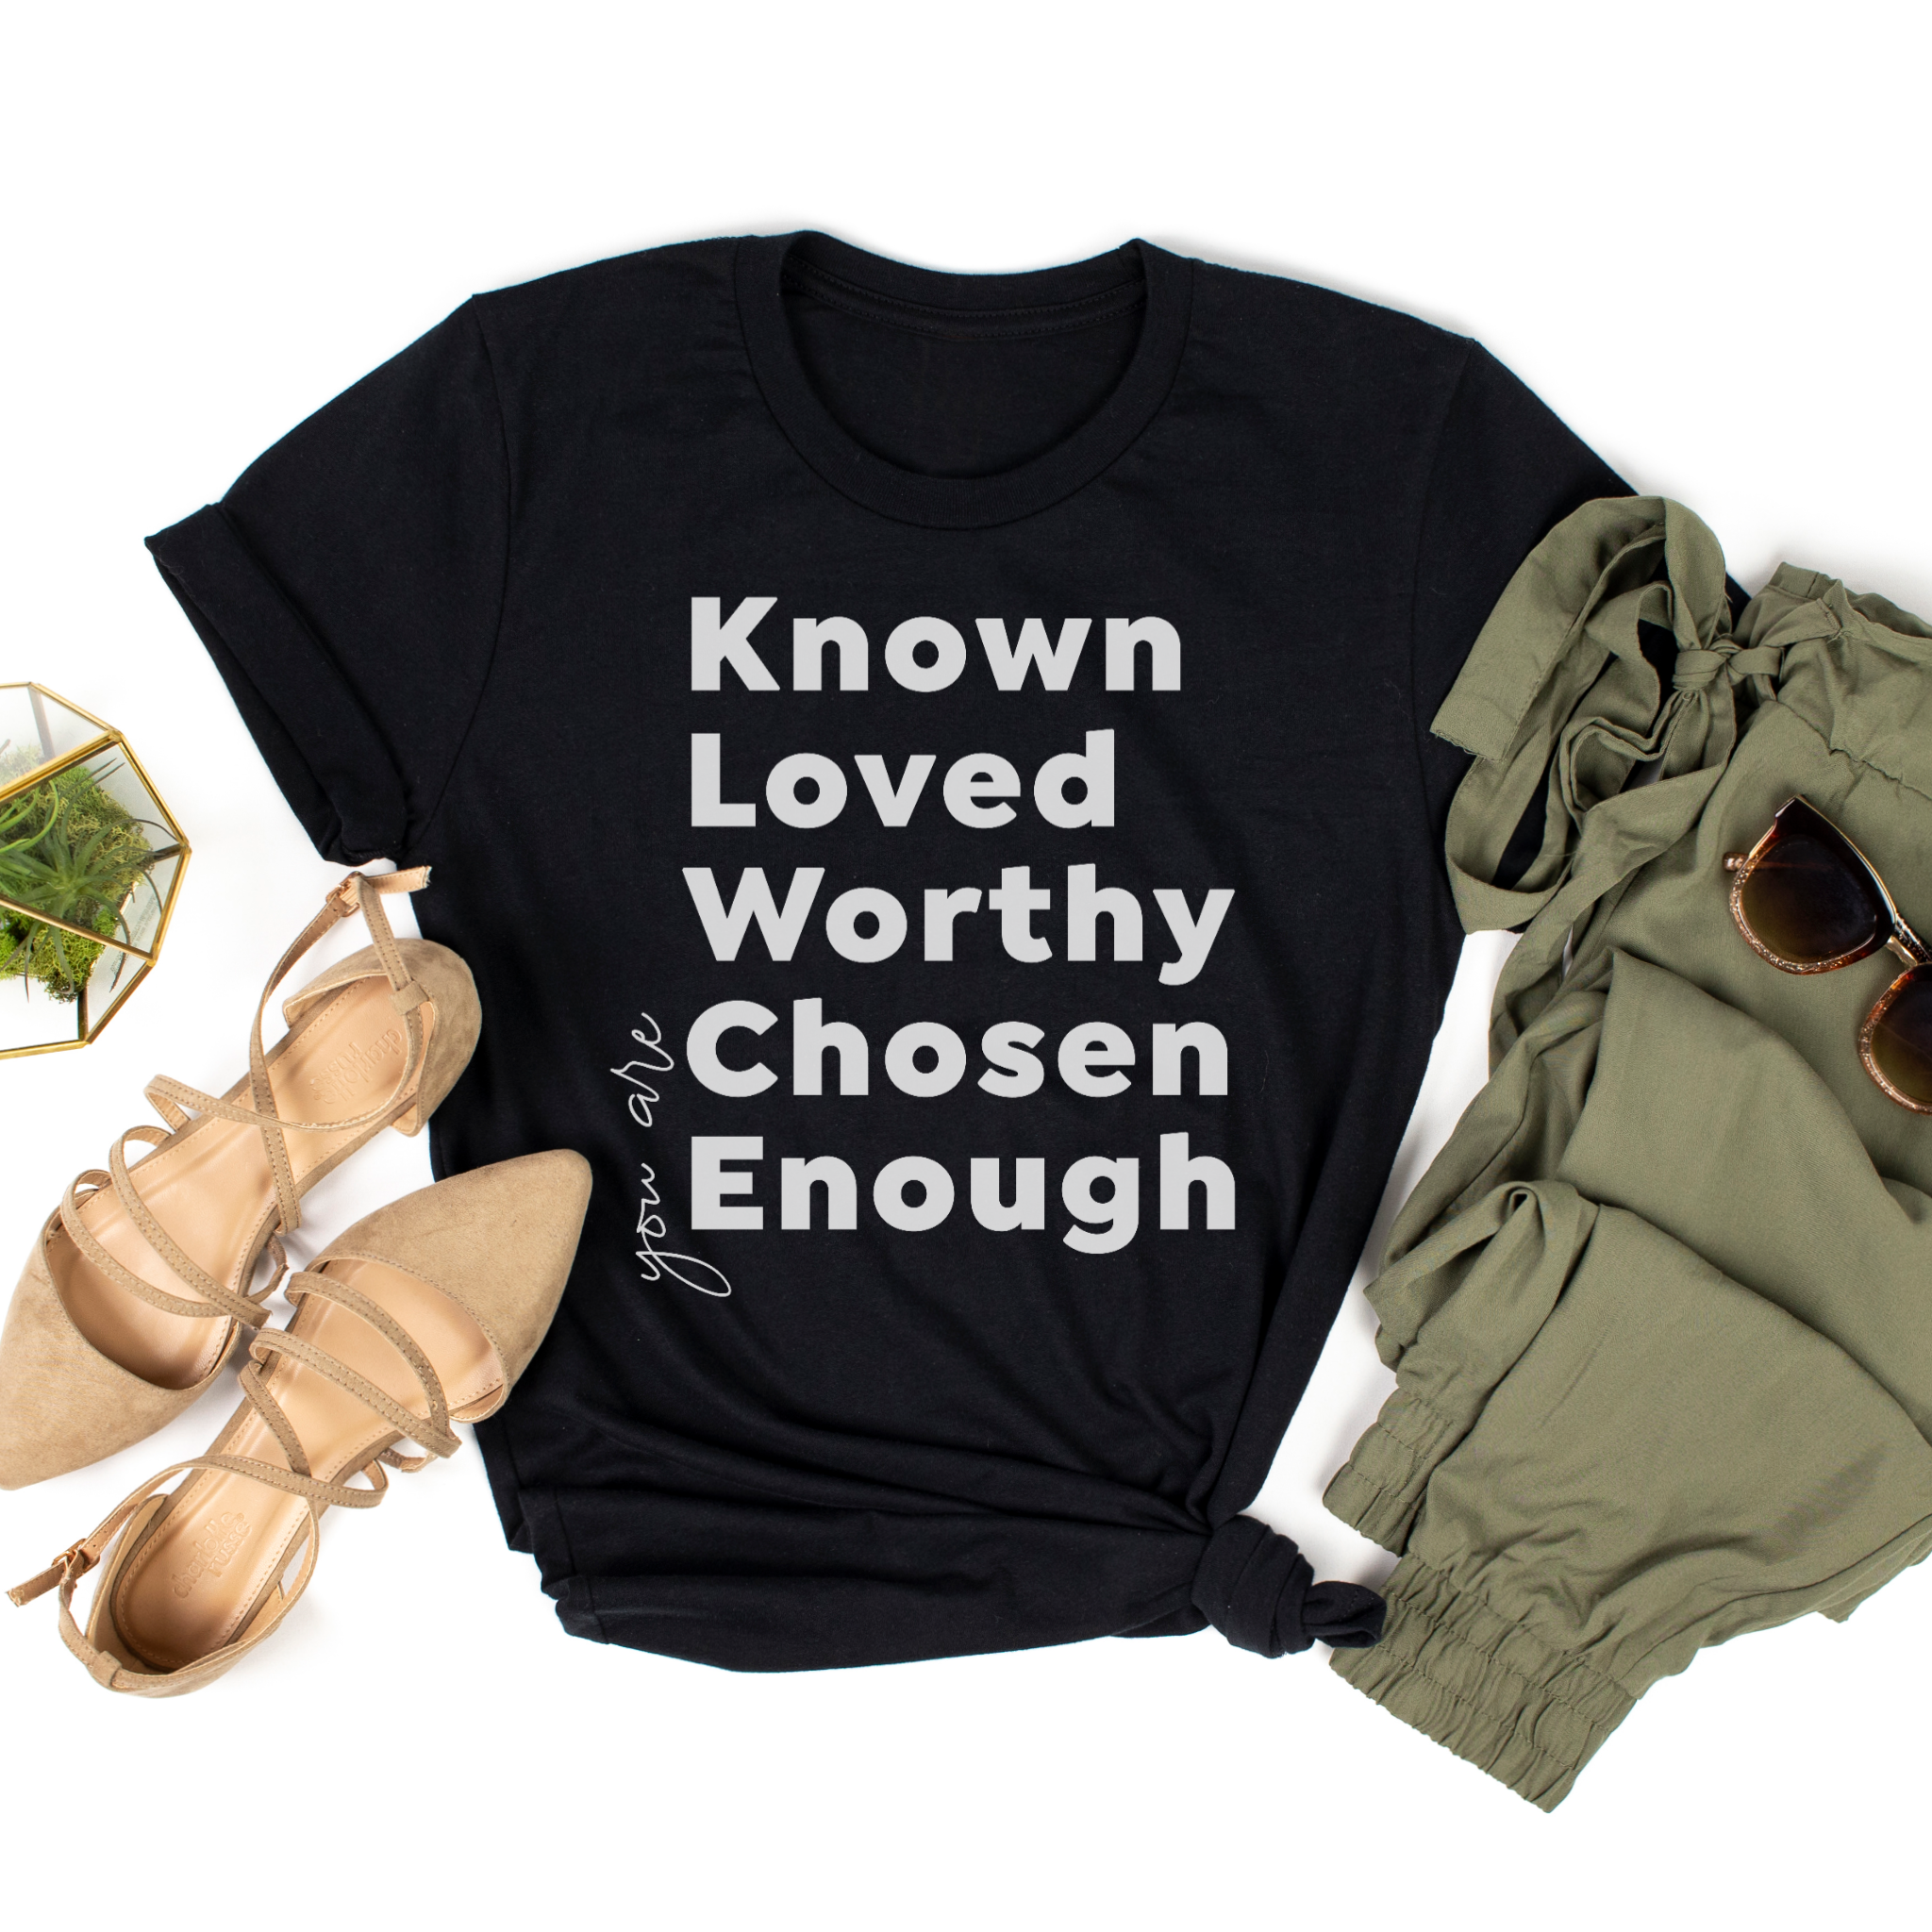 You are Known Loved Worthy Chosen Enough Women's Shirt